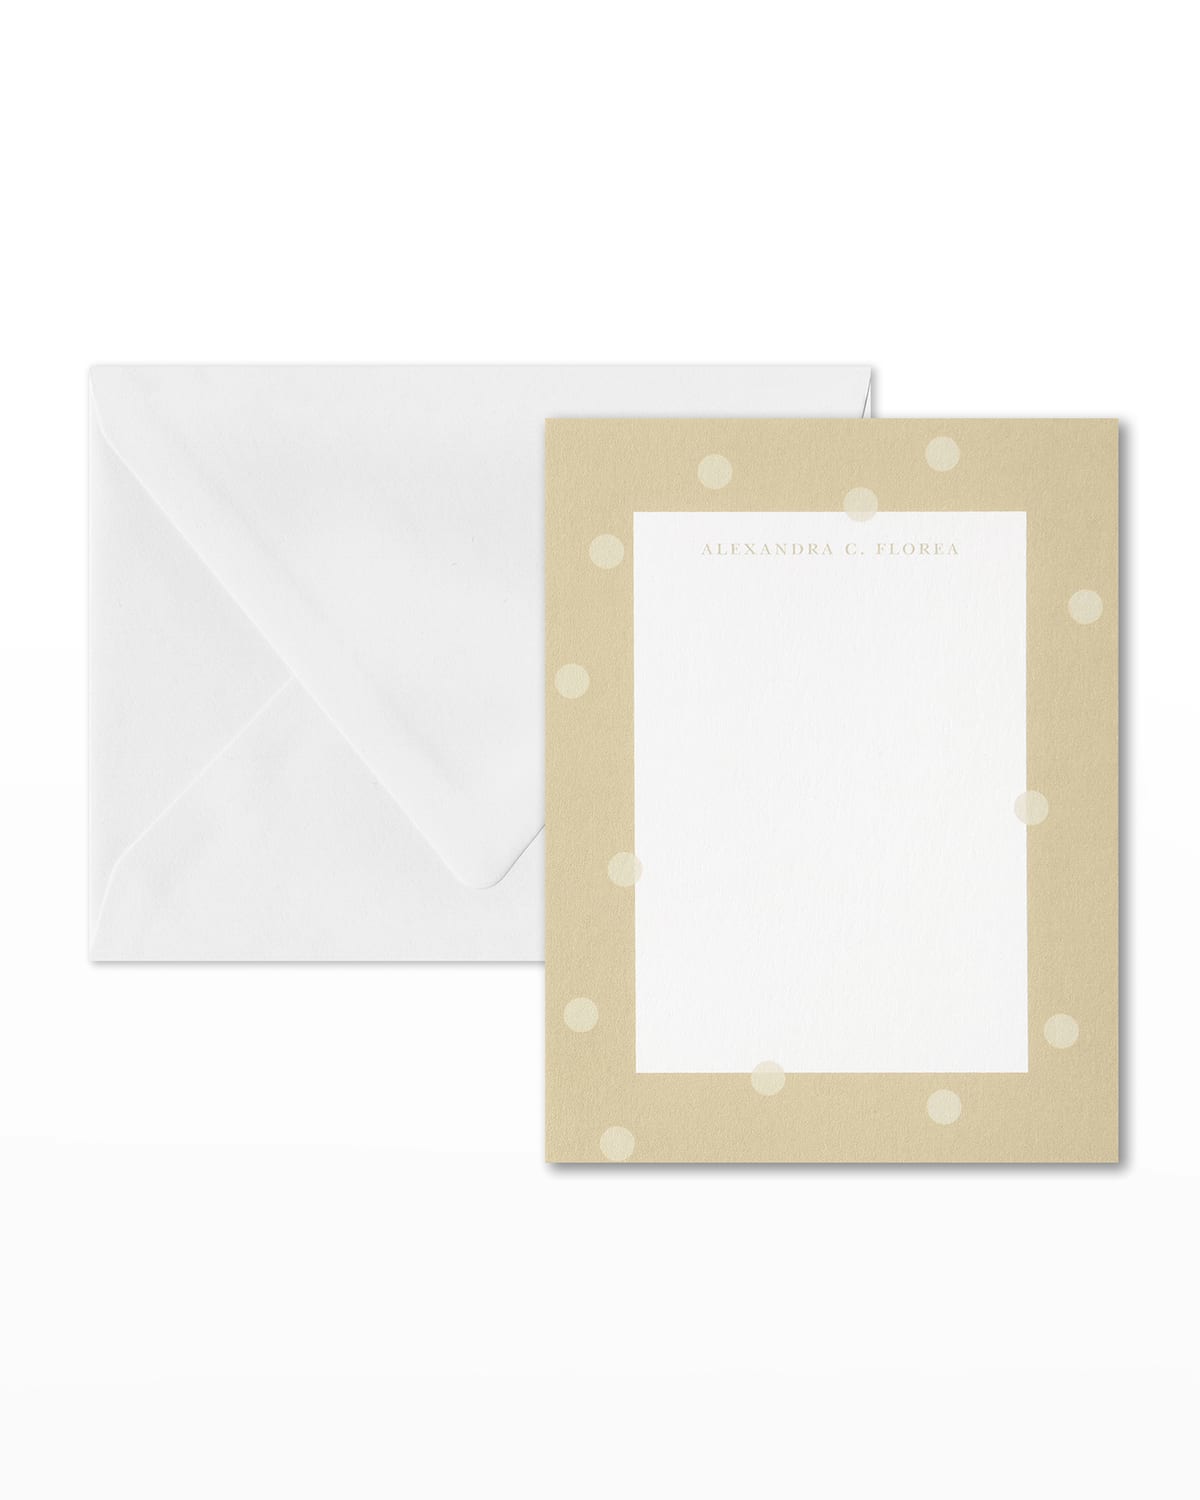 Shop Carlson Craft Floating Dots Note Card In White Smooth 130 Lb.